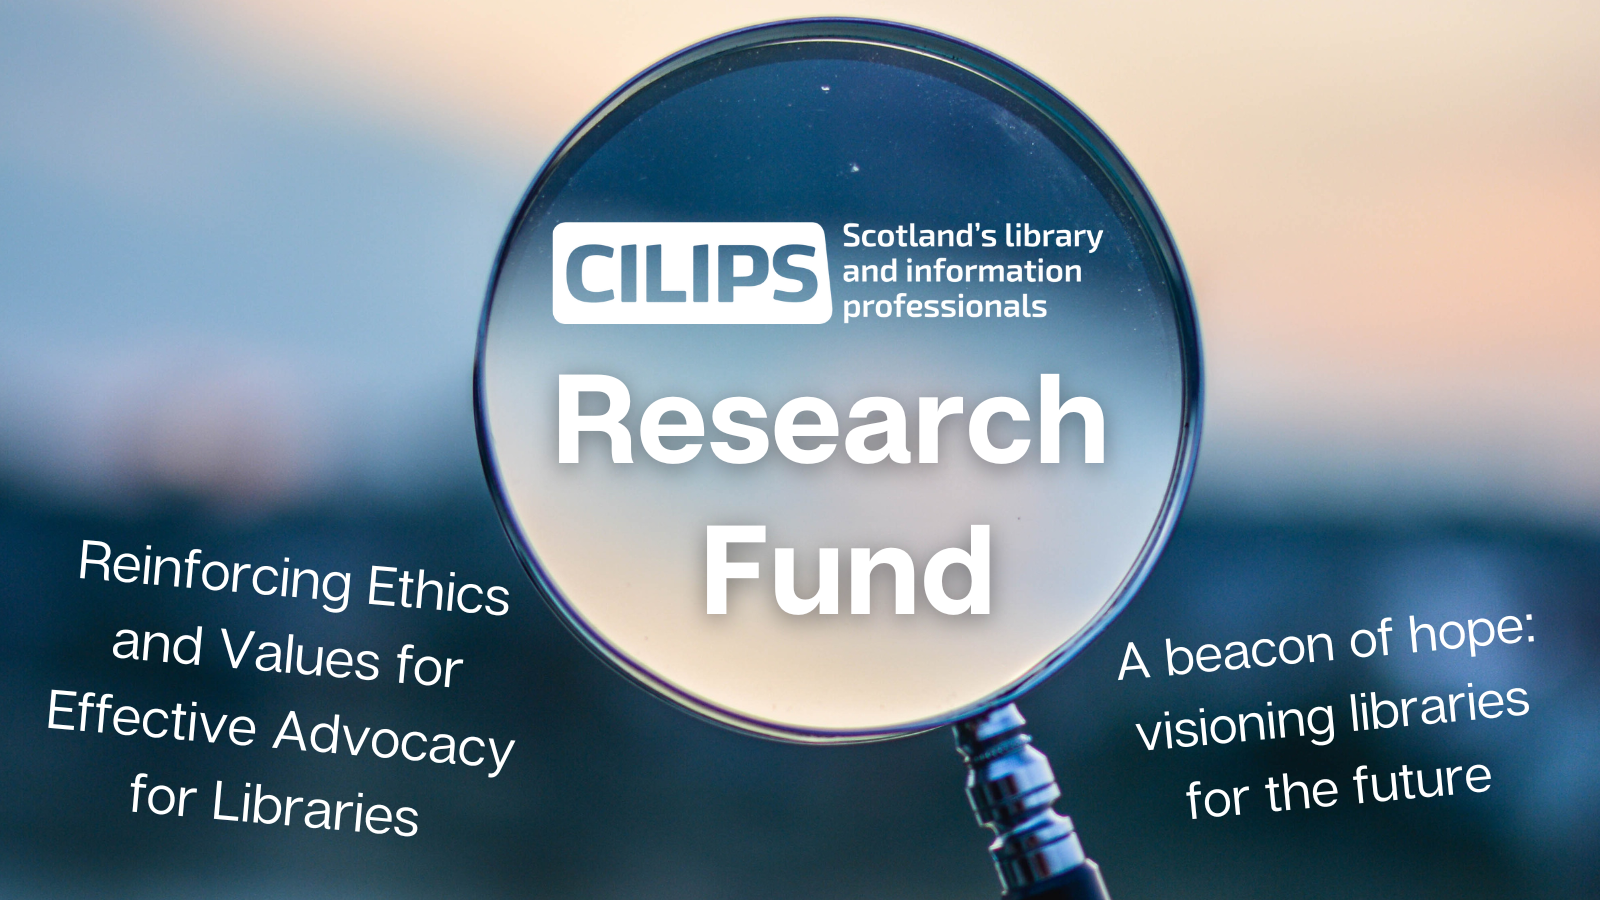 The CILIPS Research Fund logo